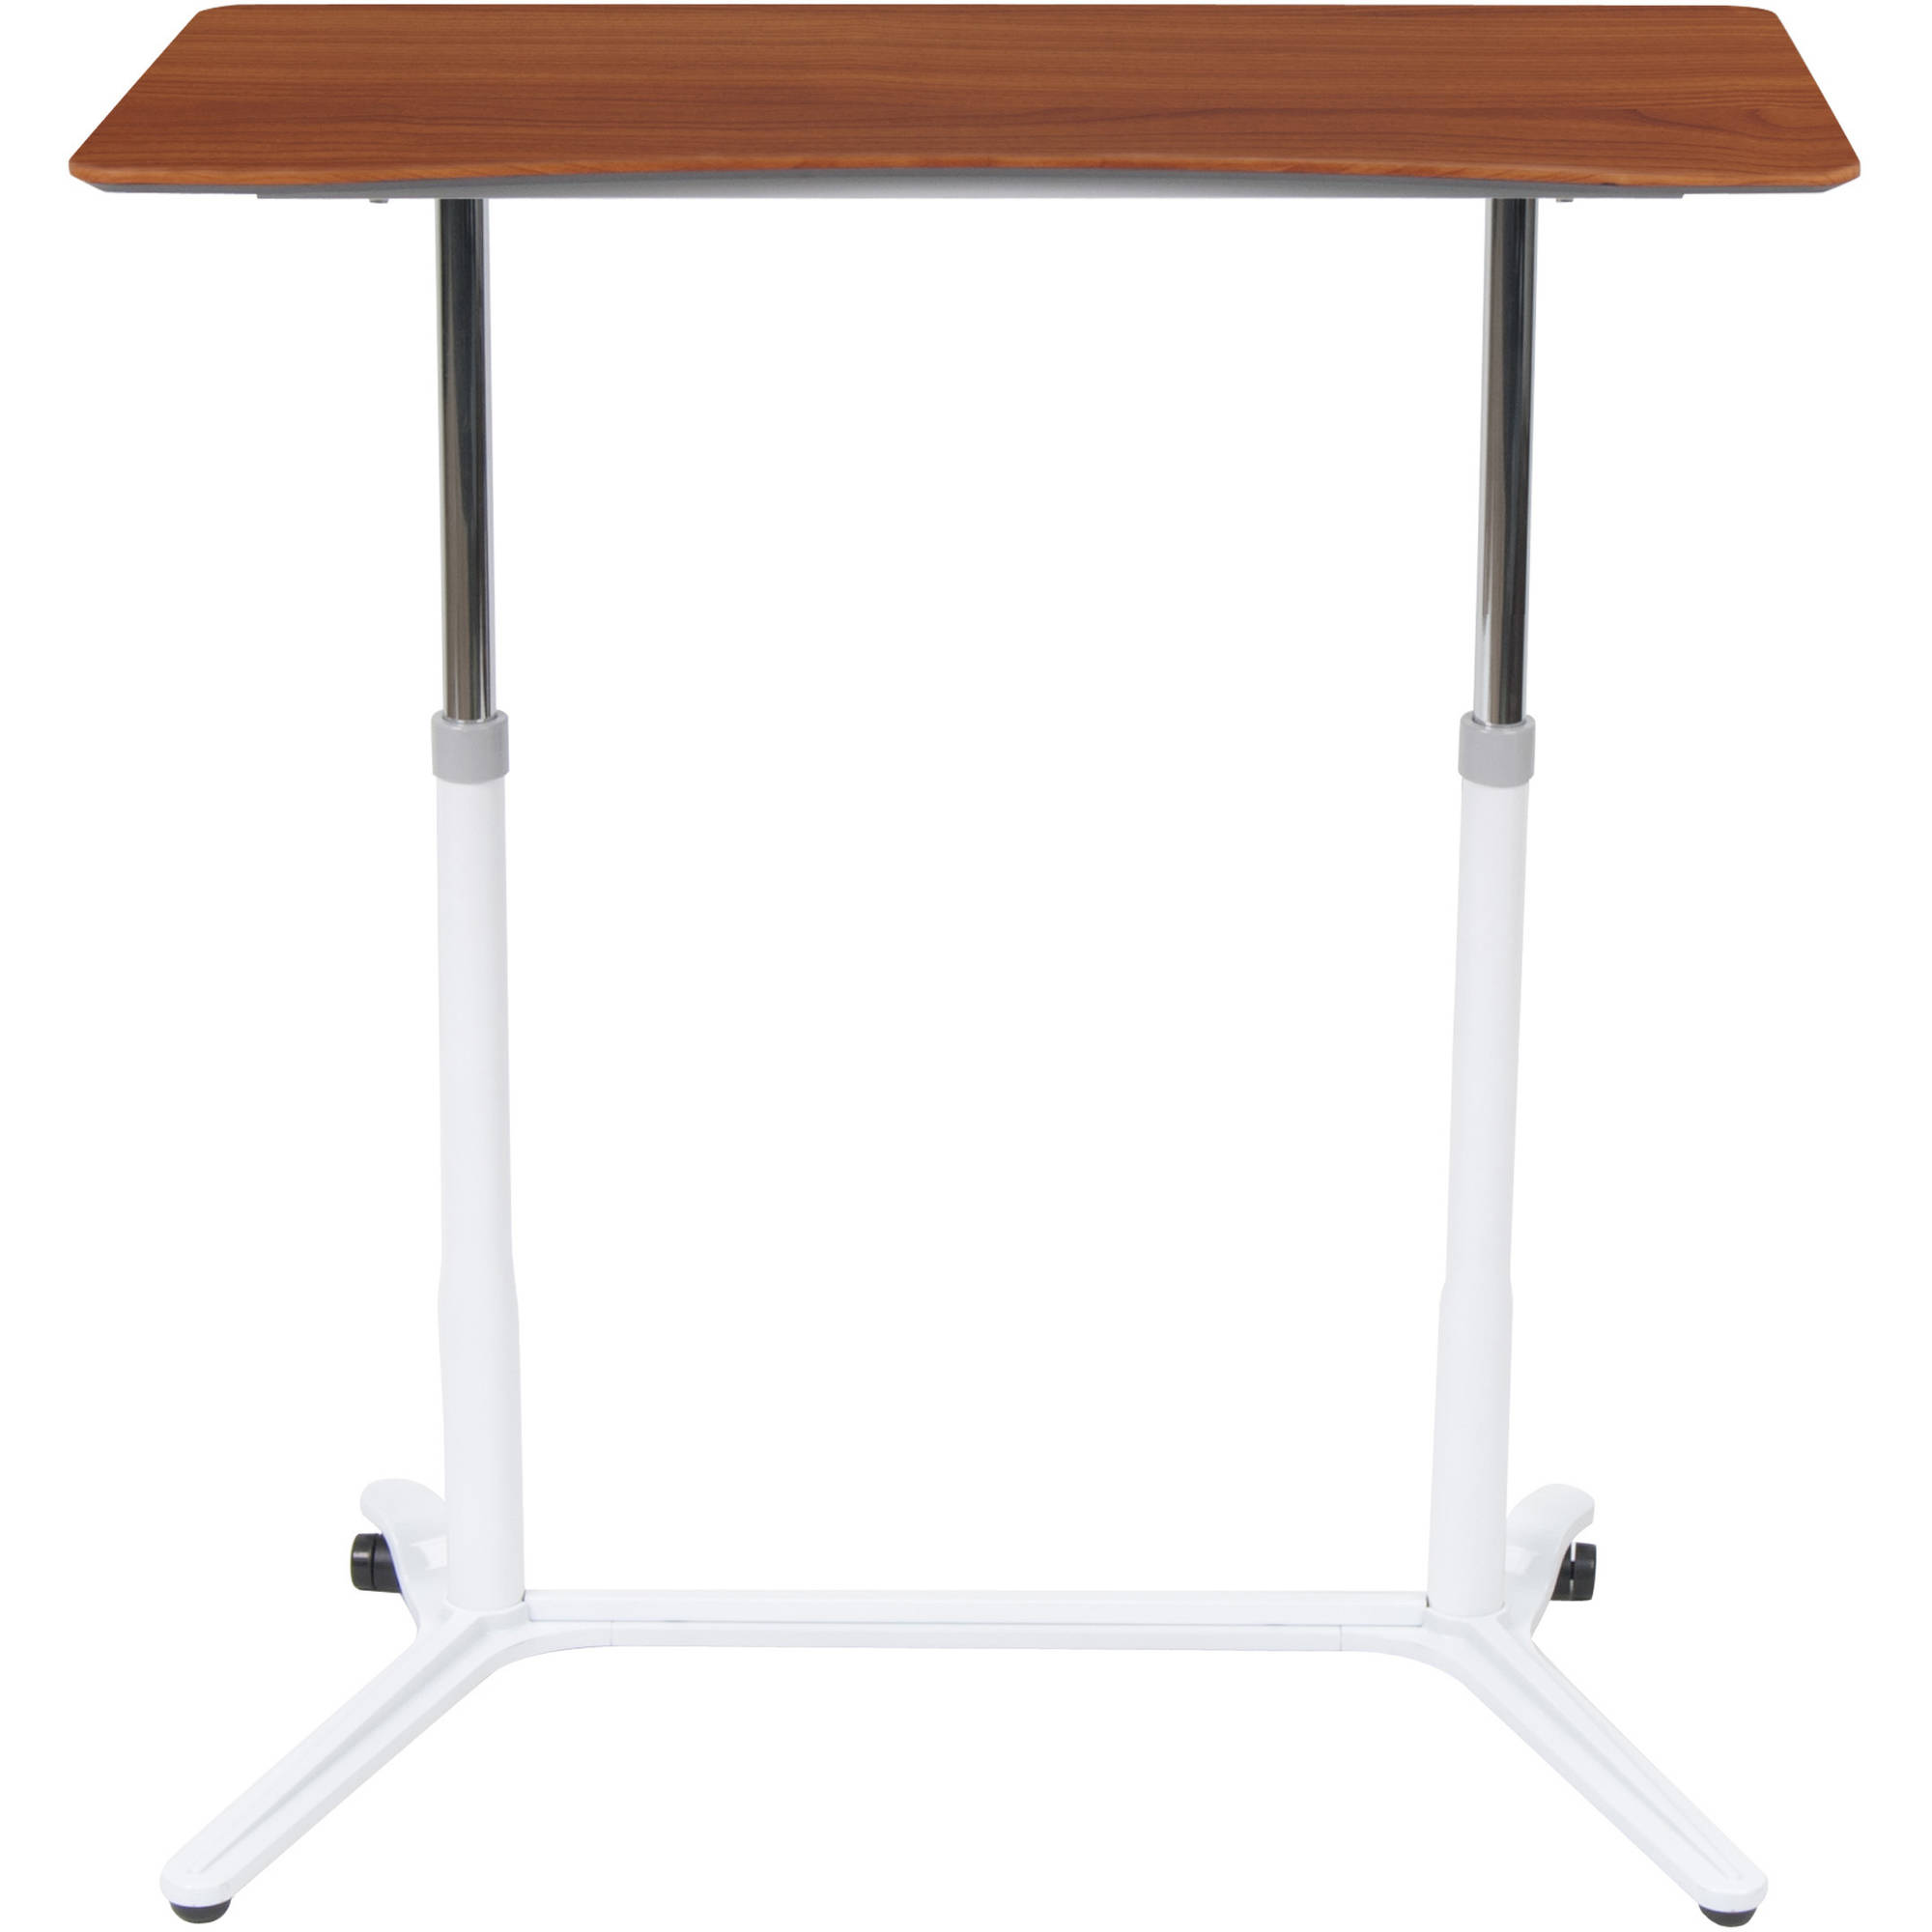 Calico Designs Sierra Adjustable Height Sit-to Stand Desk in White / Cherry # 51231 - image 3 of 4